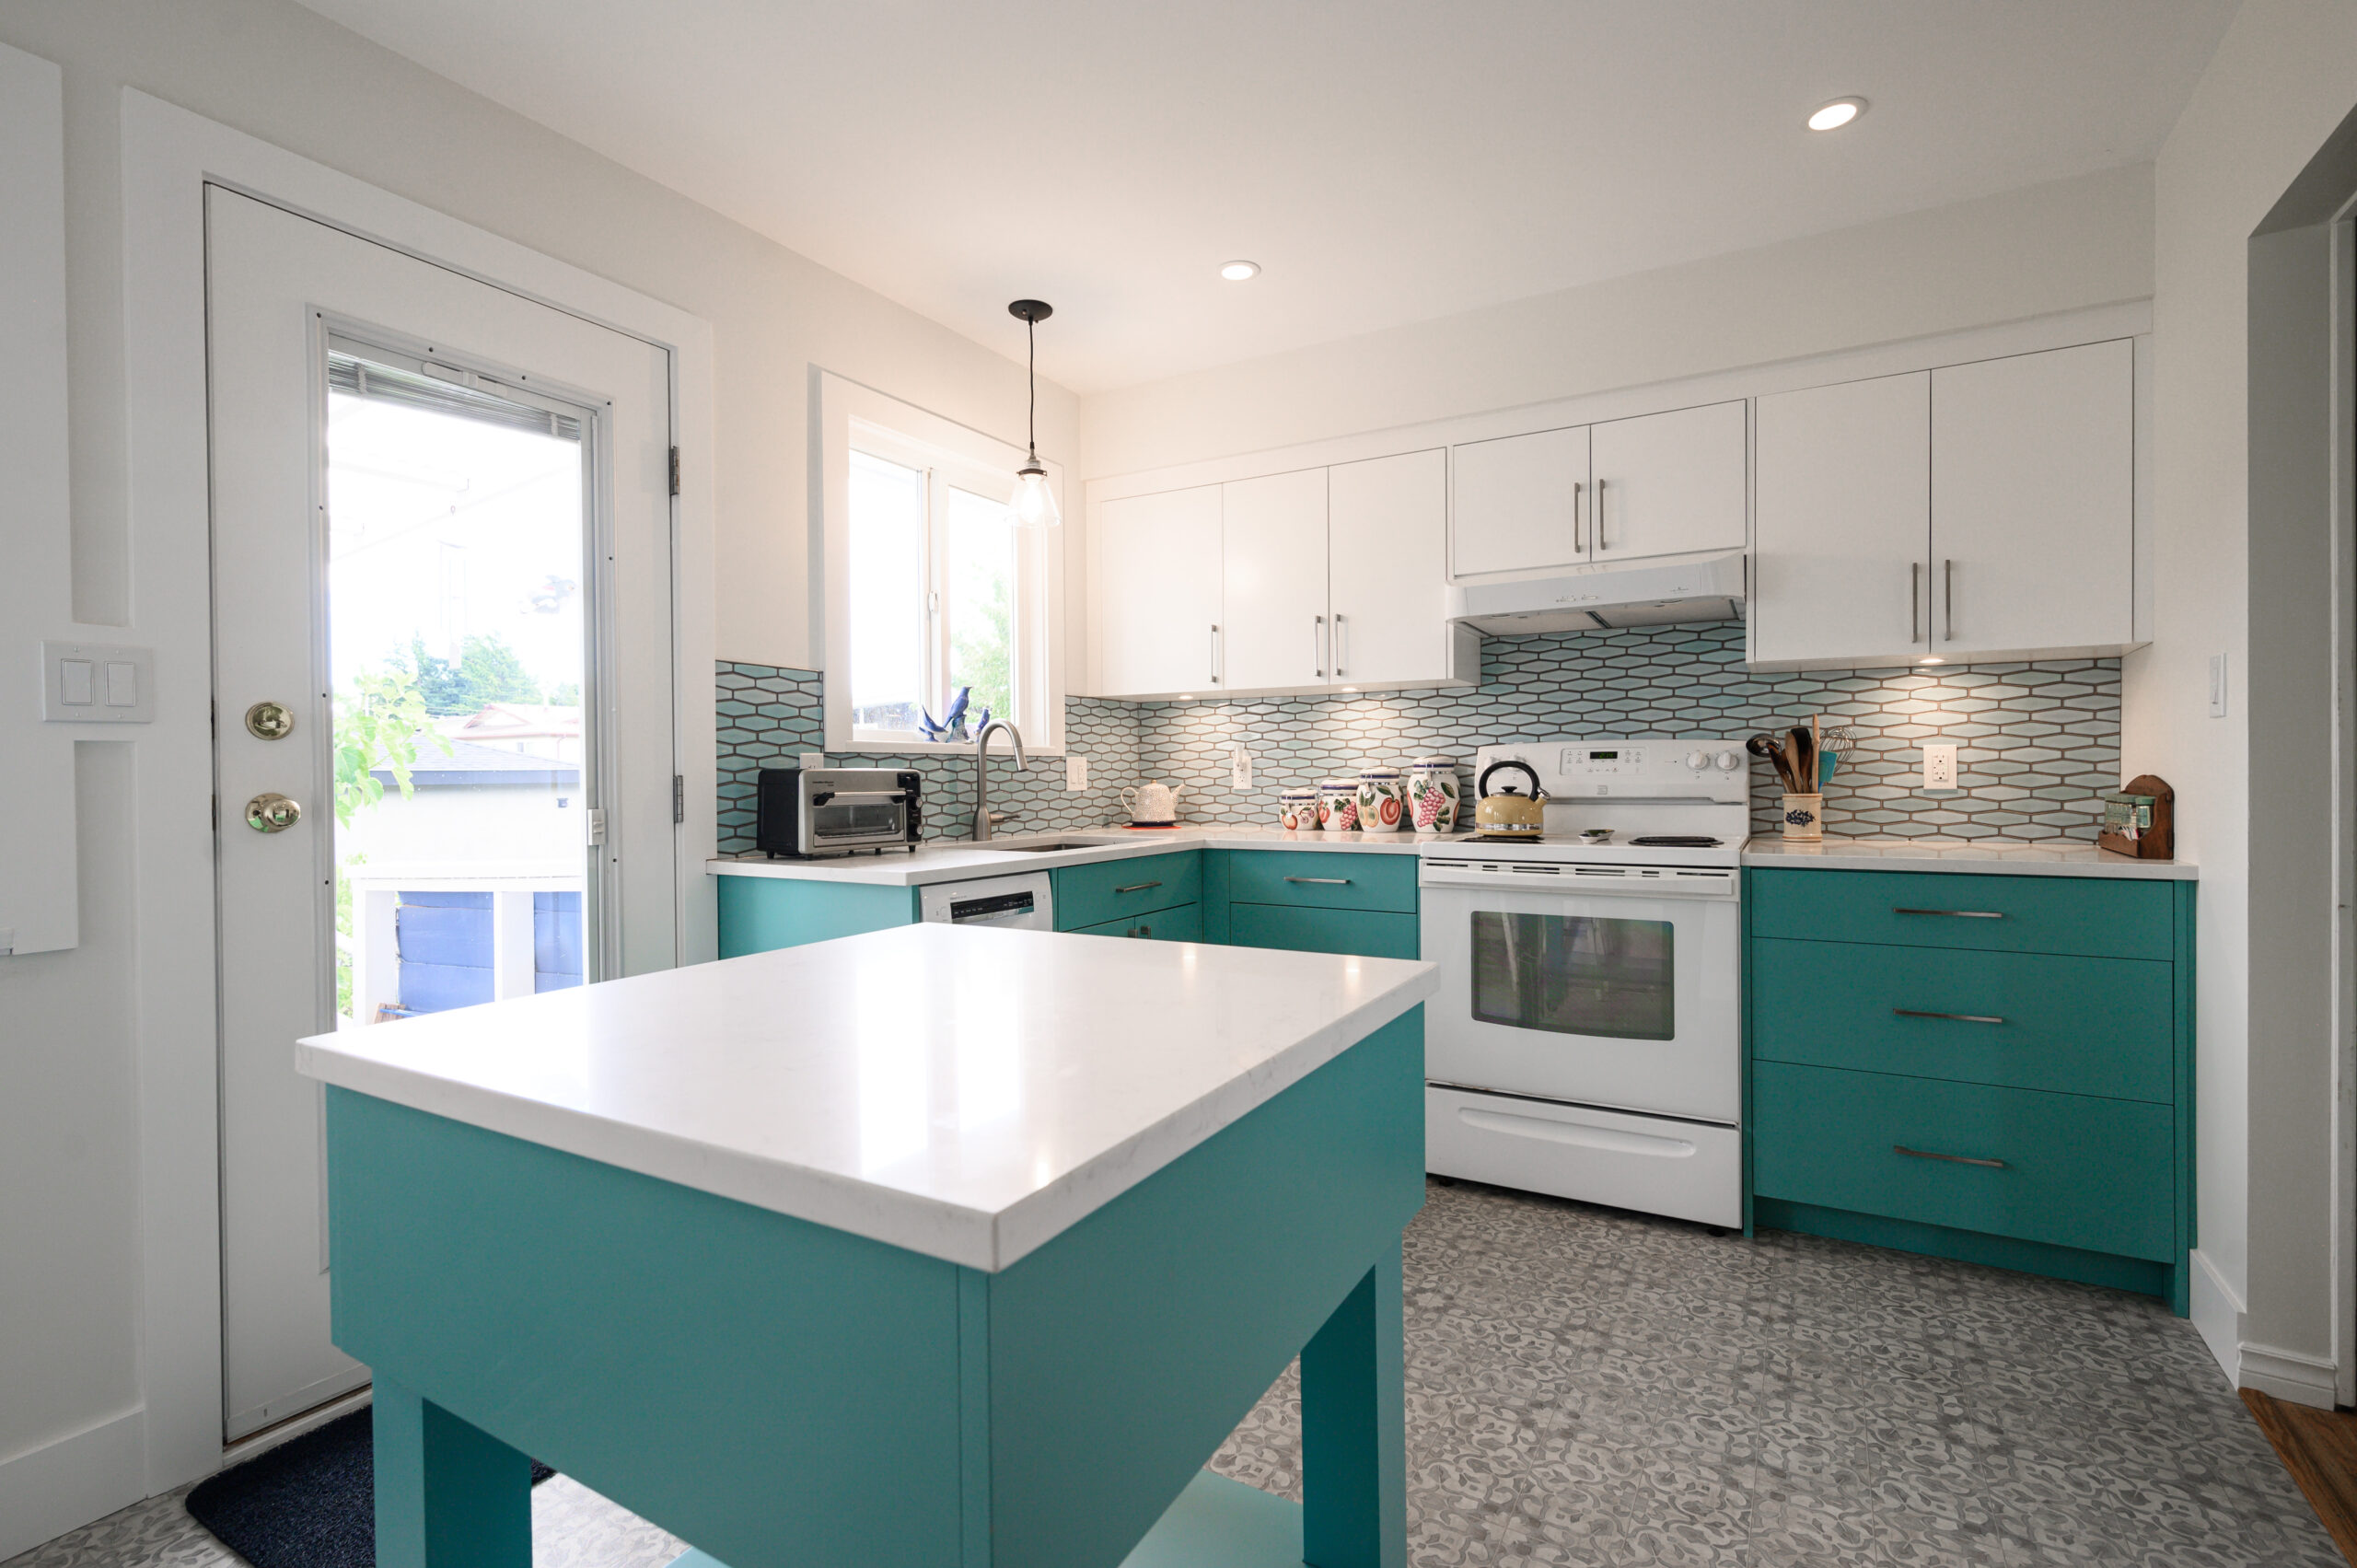 Kitchen Cabinets painted in a teal colour